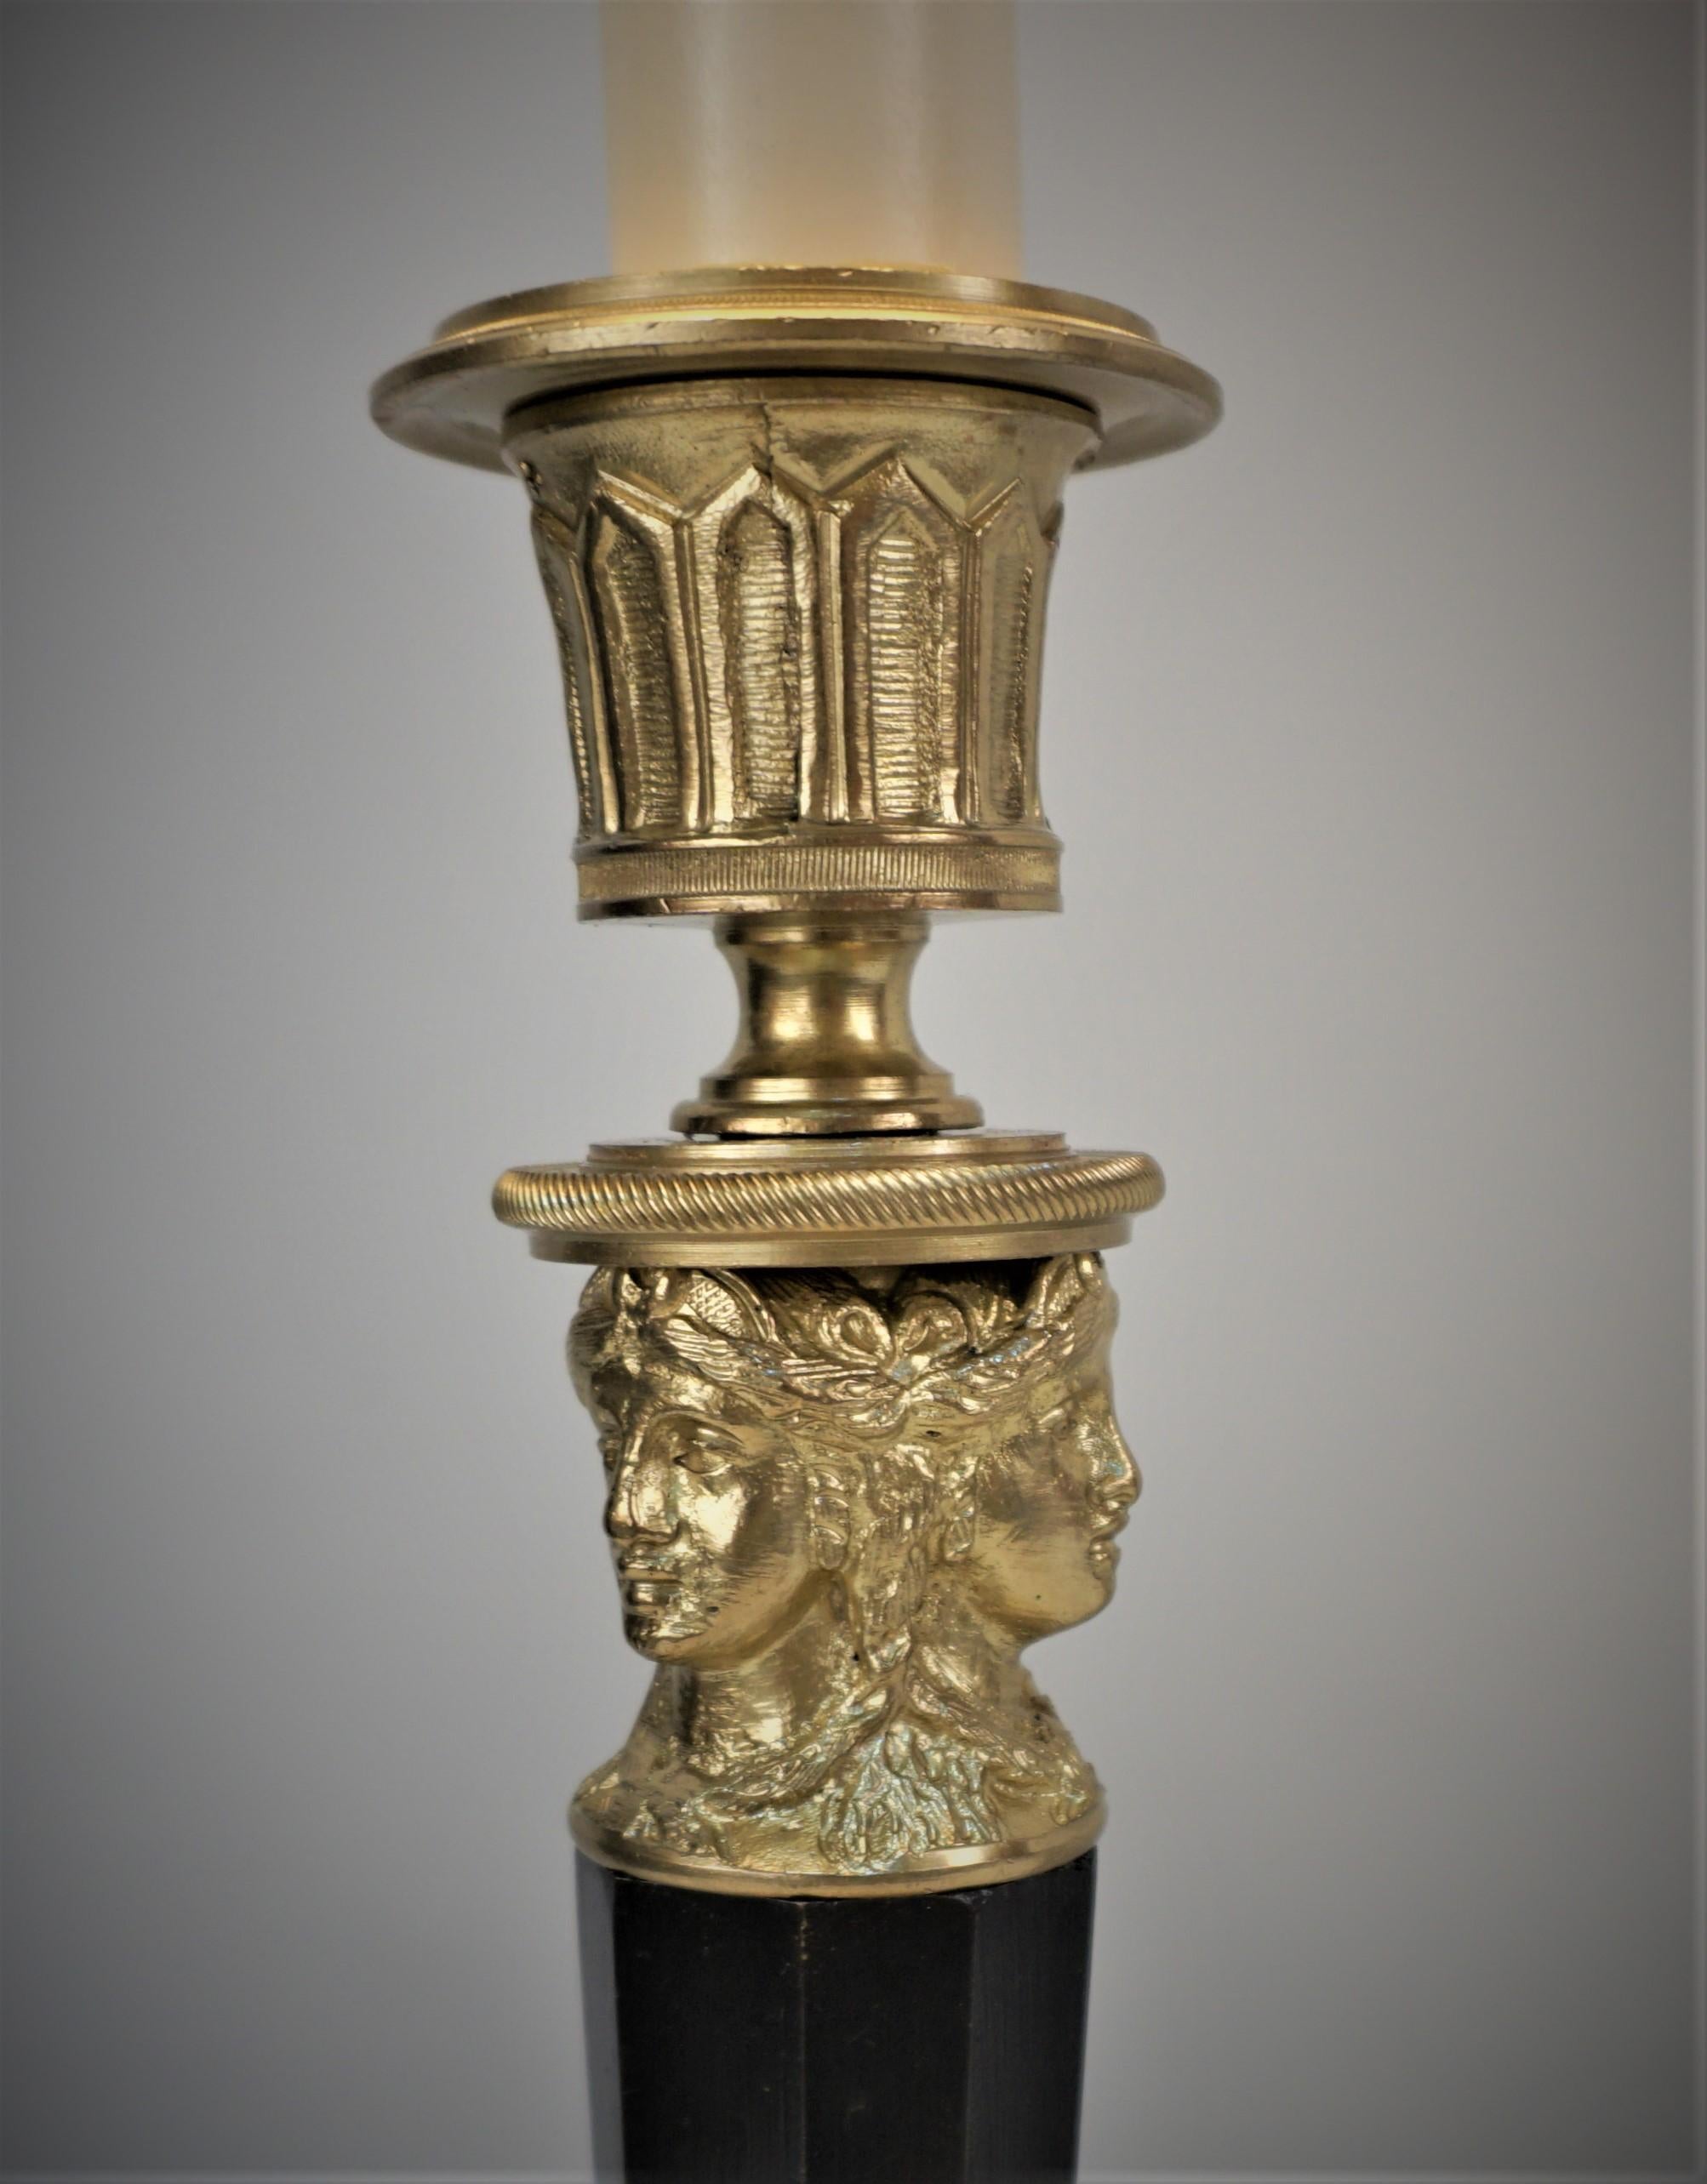 French Bronze Empire Candlestick Lamp In Good Condition For Sale In Fairfax, VA